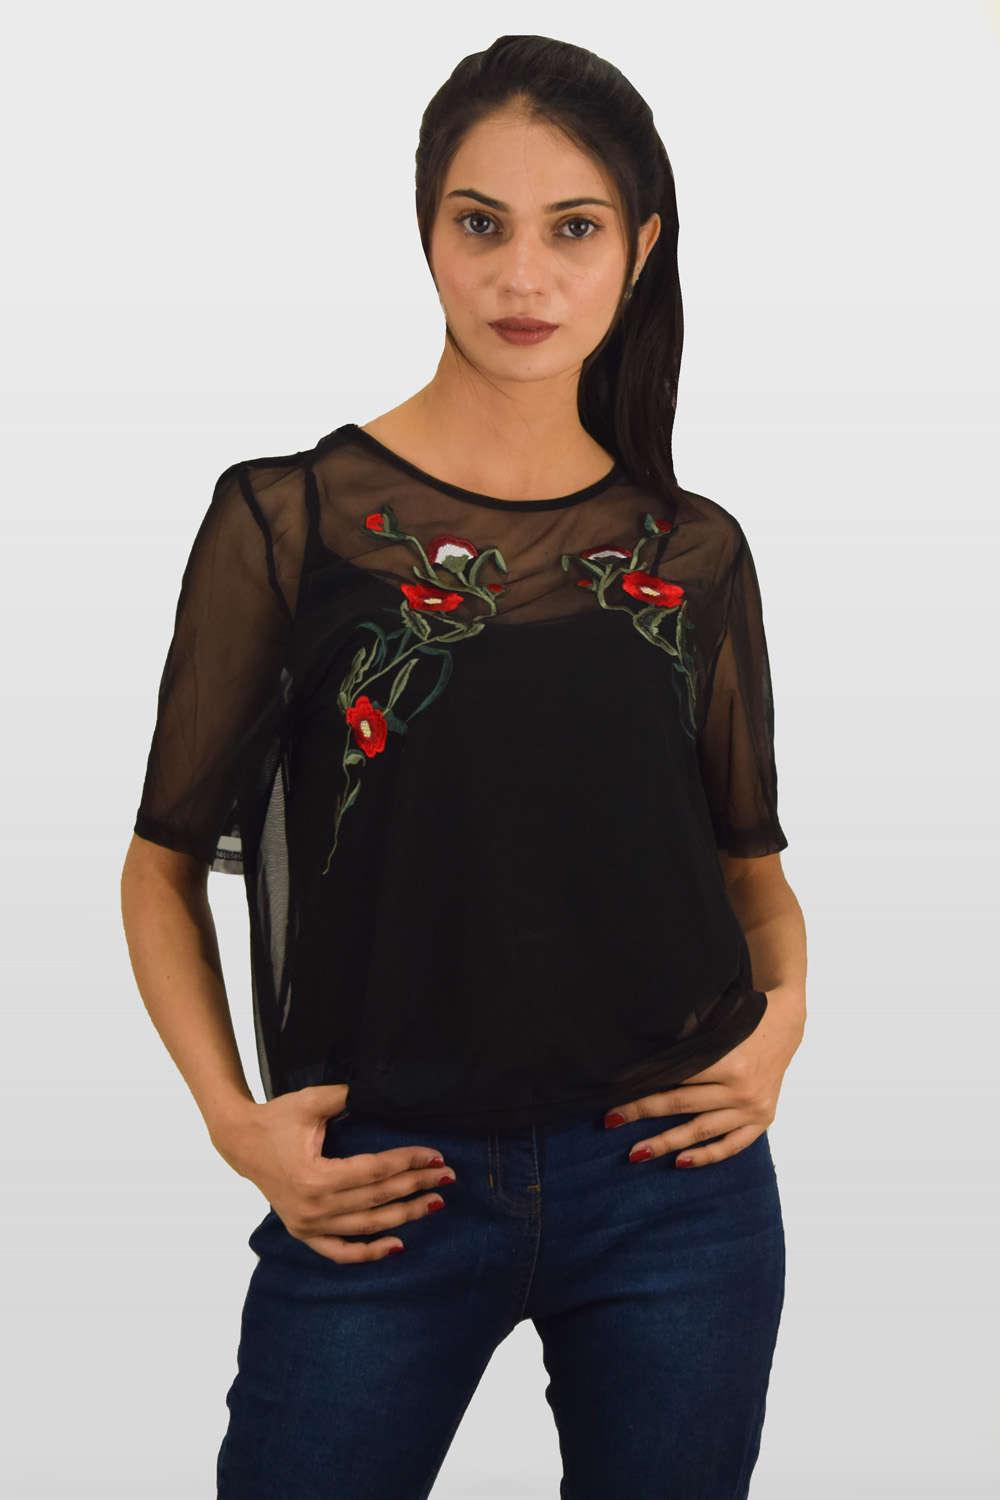 Black Embroidered Floral Mesh Overlay Top